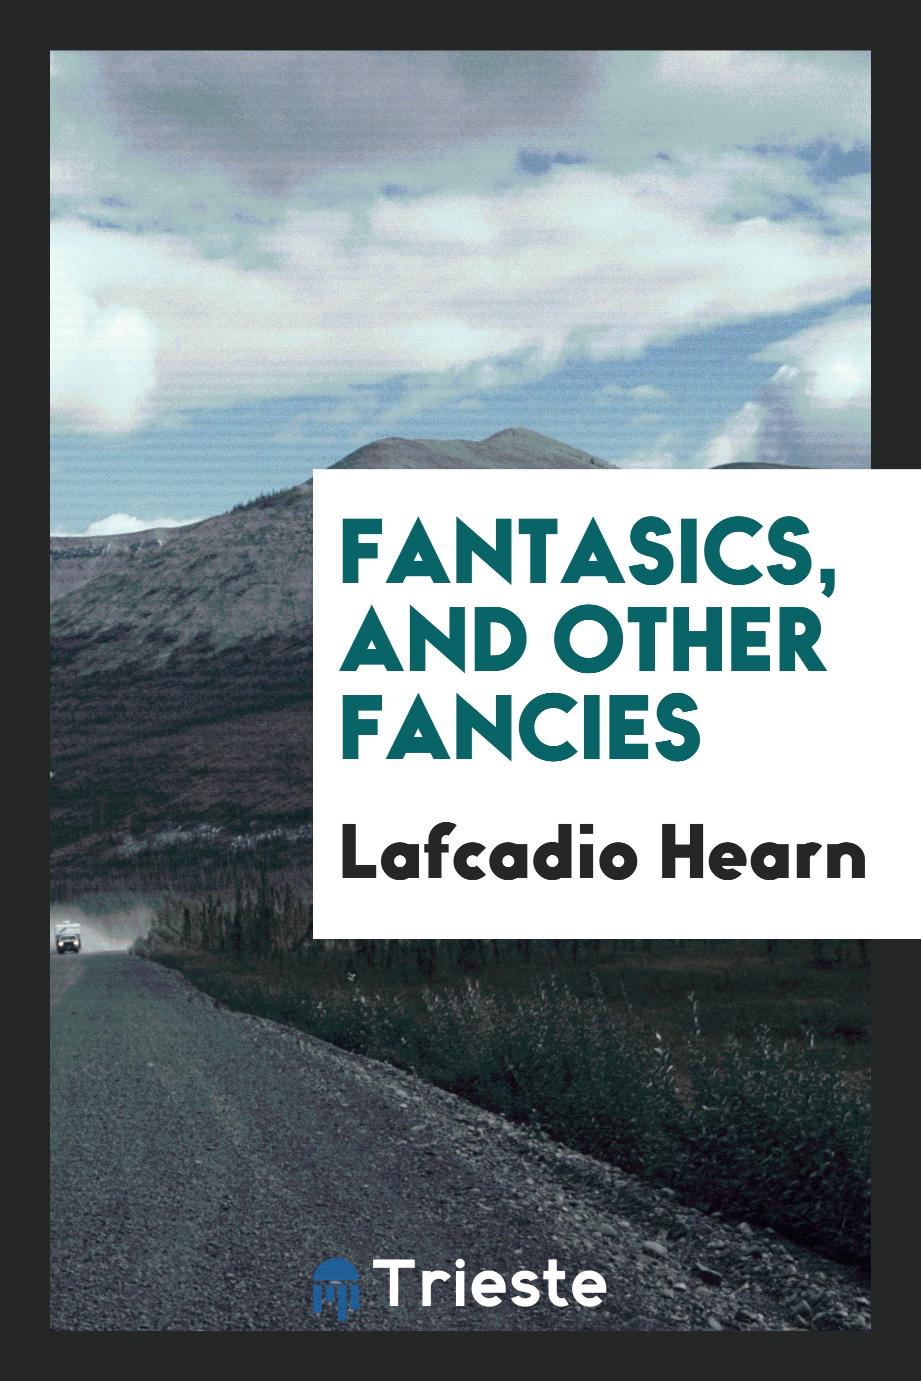 Fantasics, and other fancies